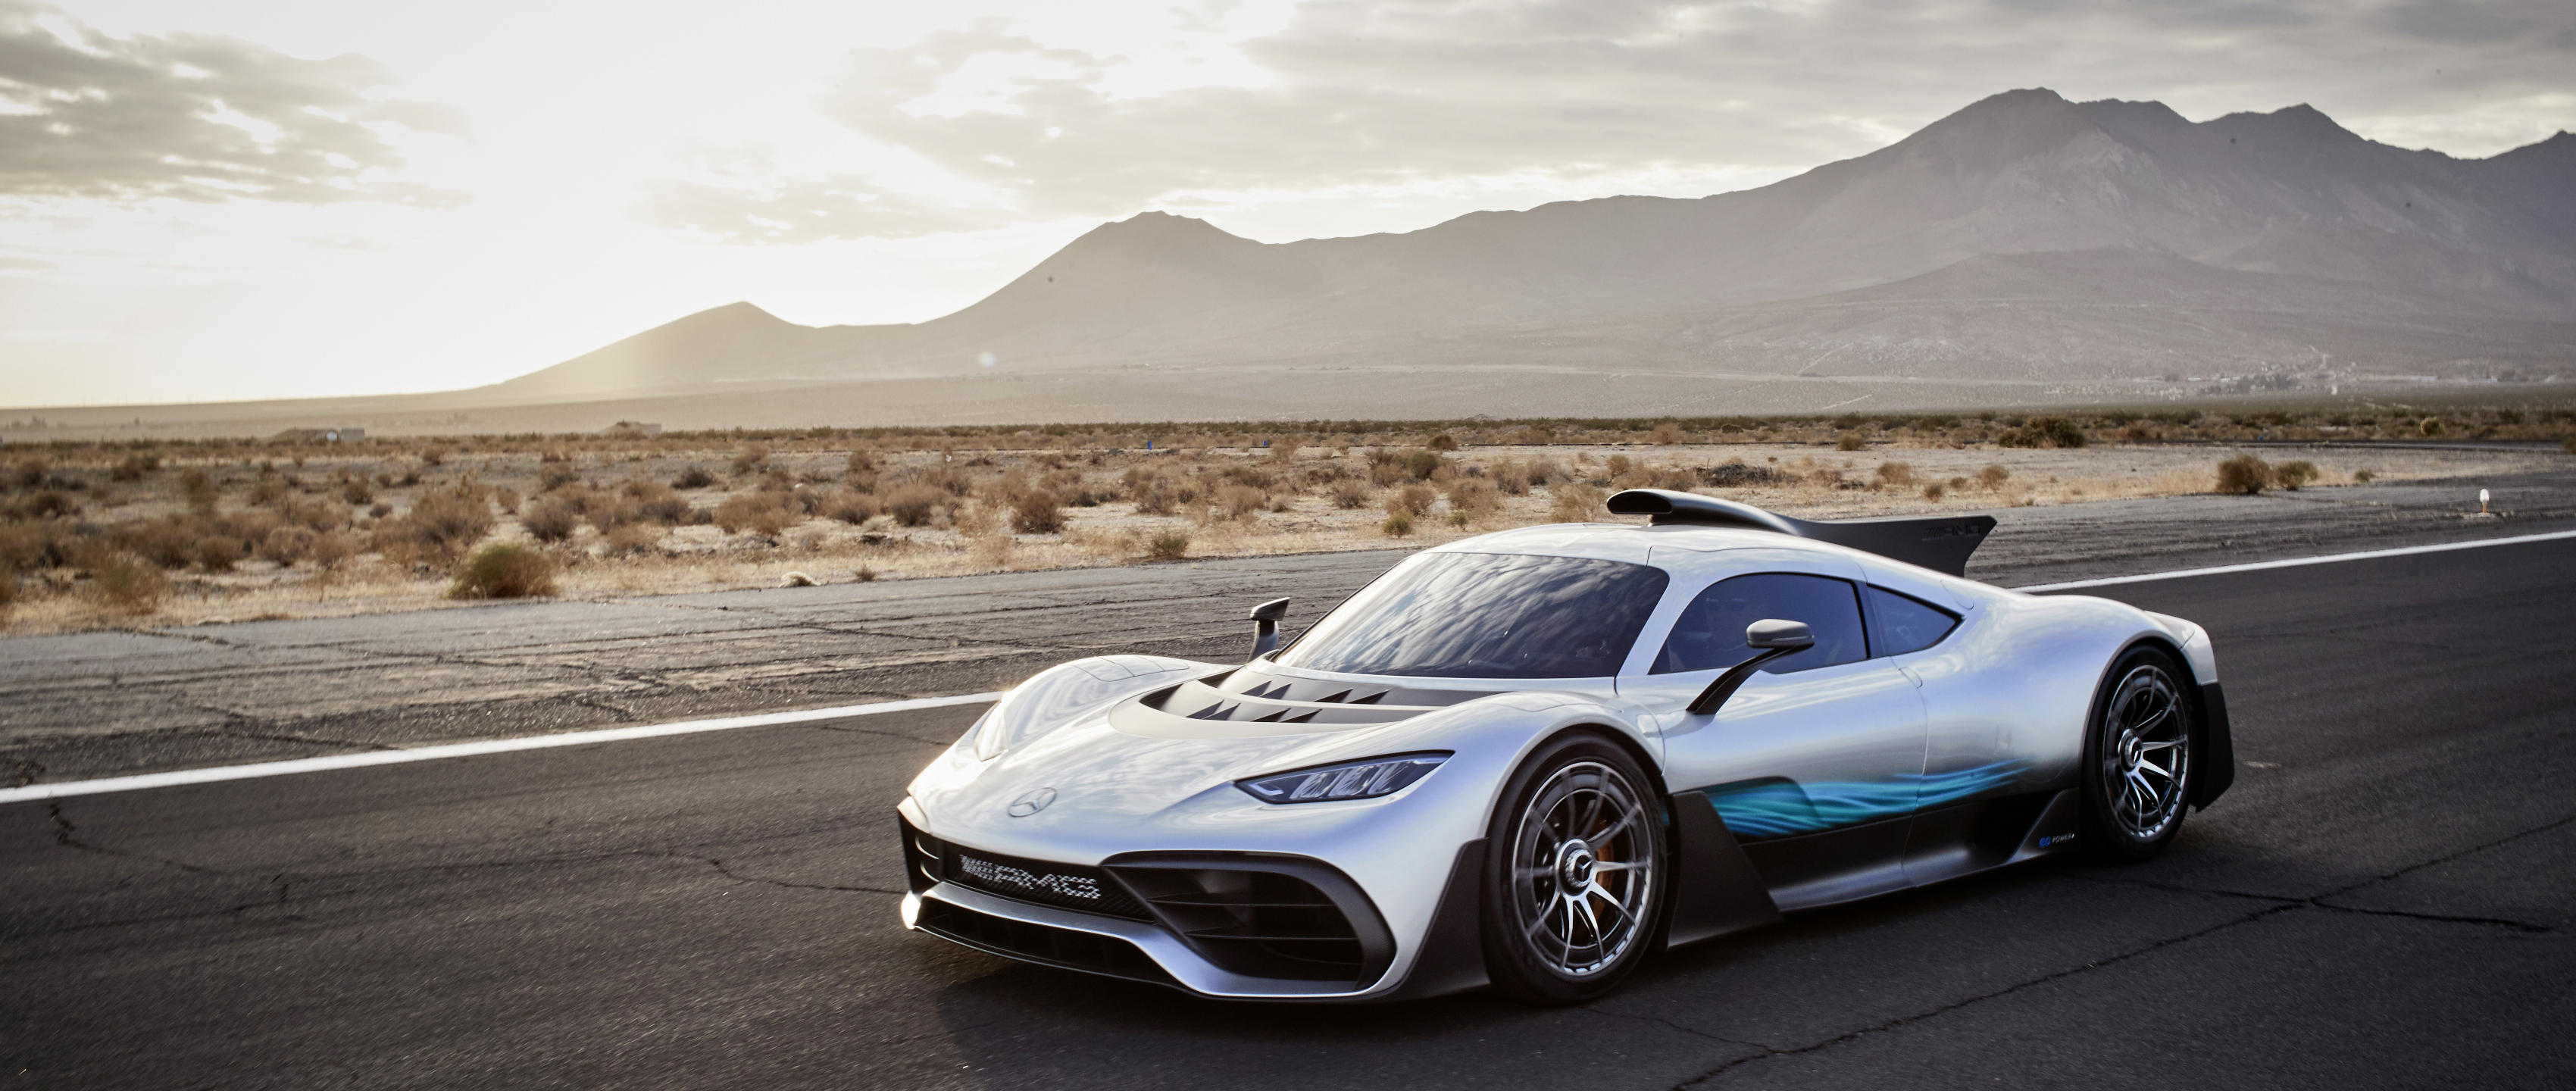 Mercedes AMG Project ONE Wallpaper gallery